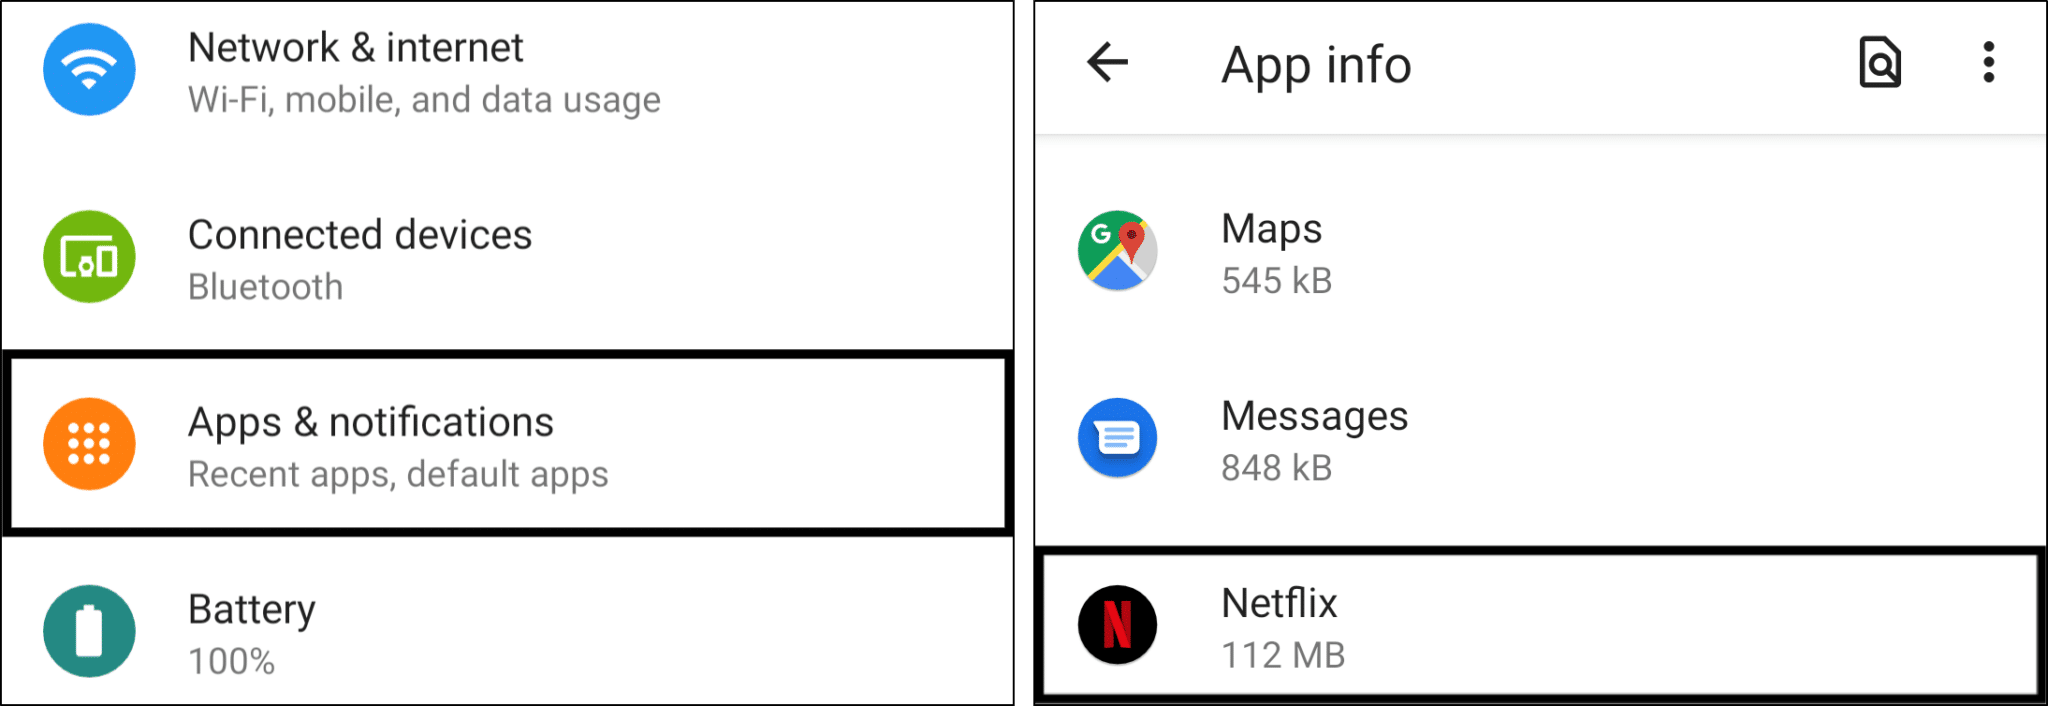 access Netflix app settings in system settings on Android